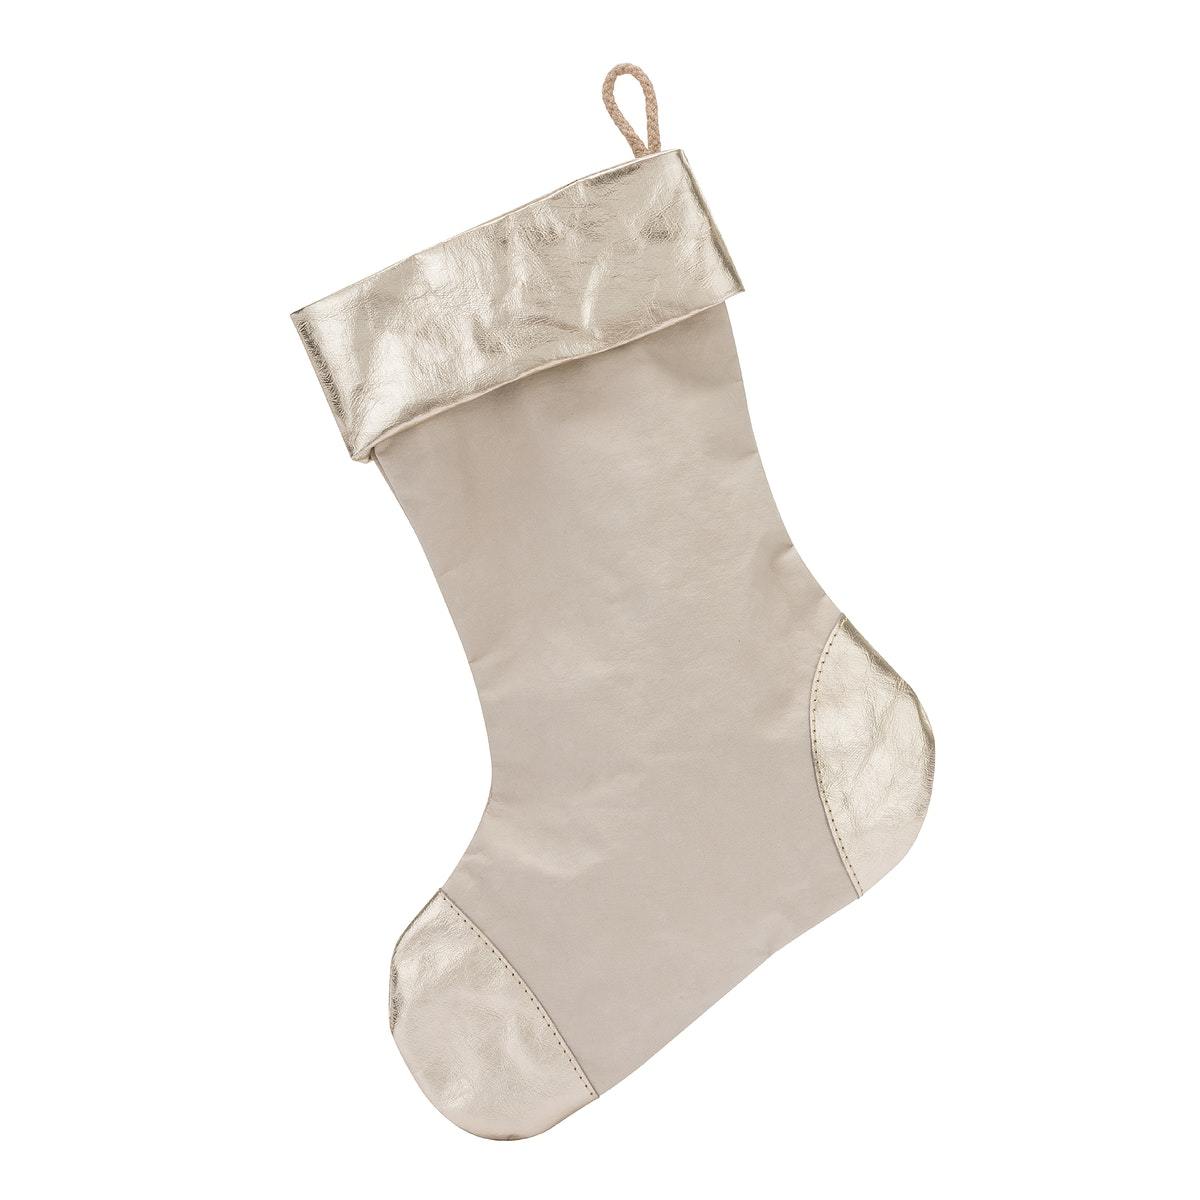 A washable paper Christmas stocking is shown. The body of the stocking is pale cream in colour. There is a fabric hanging loop on the back of the stocking at the top. The cuff, heel and toe of the stocking are platinum metallic.